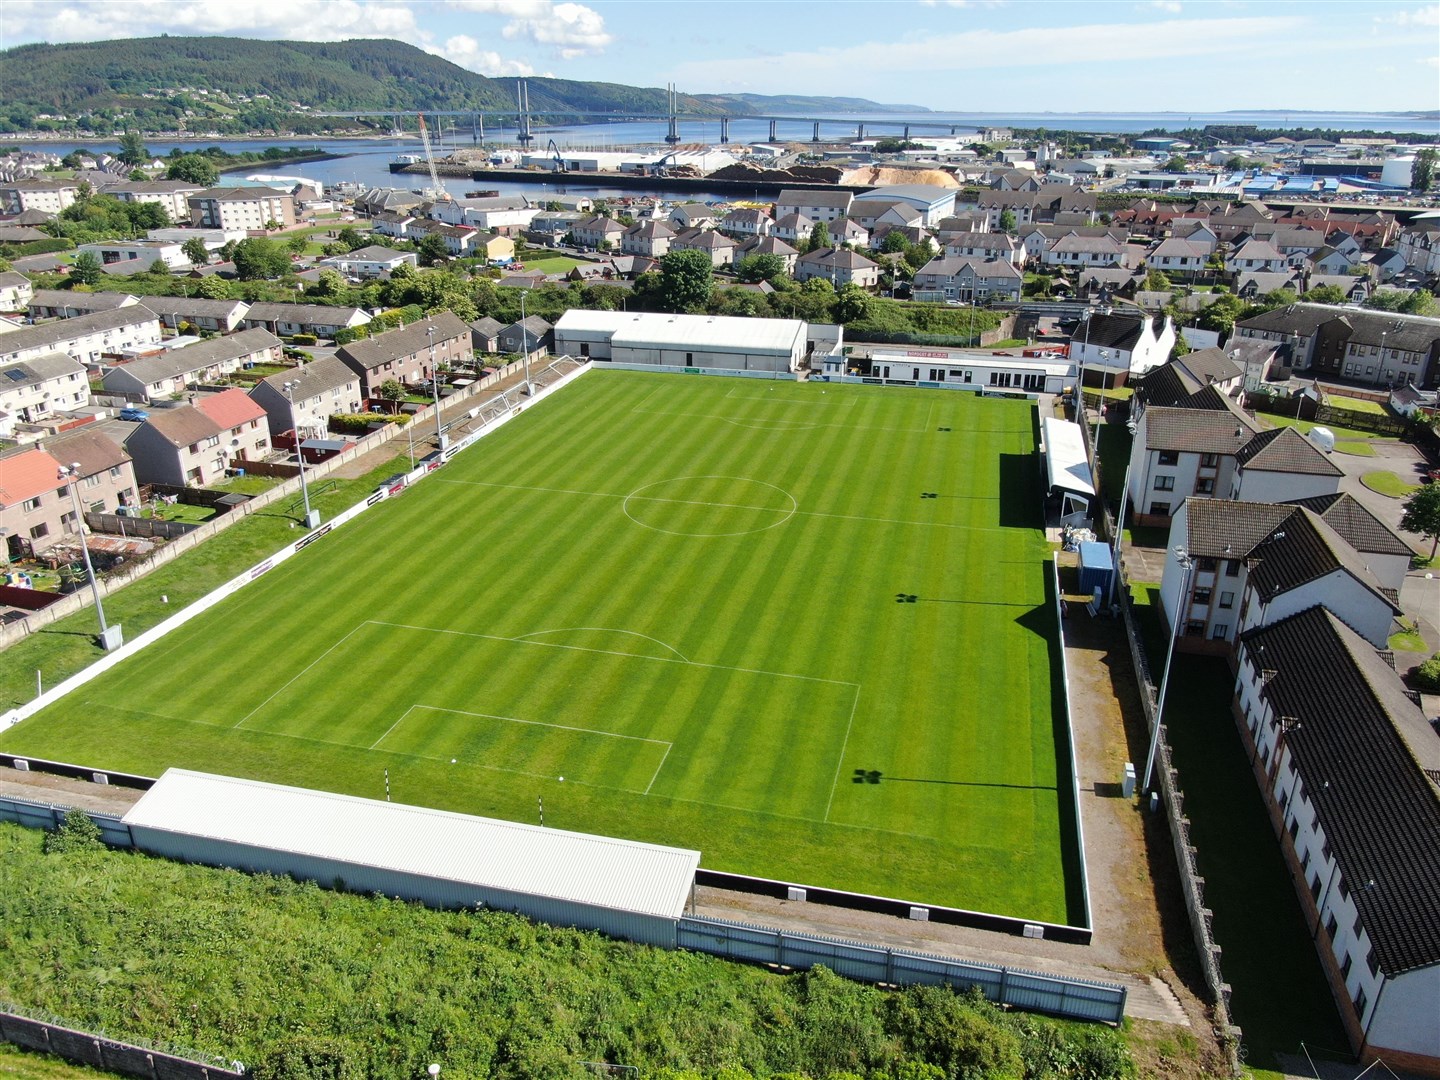 Clach's home ground Grant Street Park will host the cup final between Ross County and Nairn County.